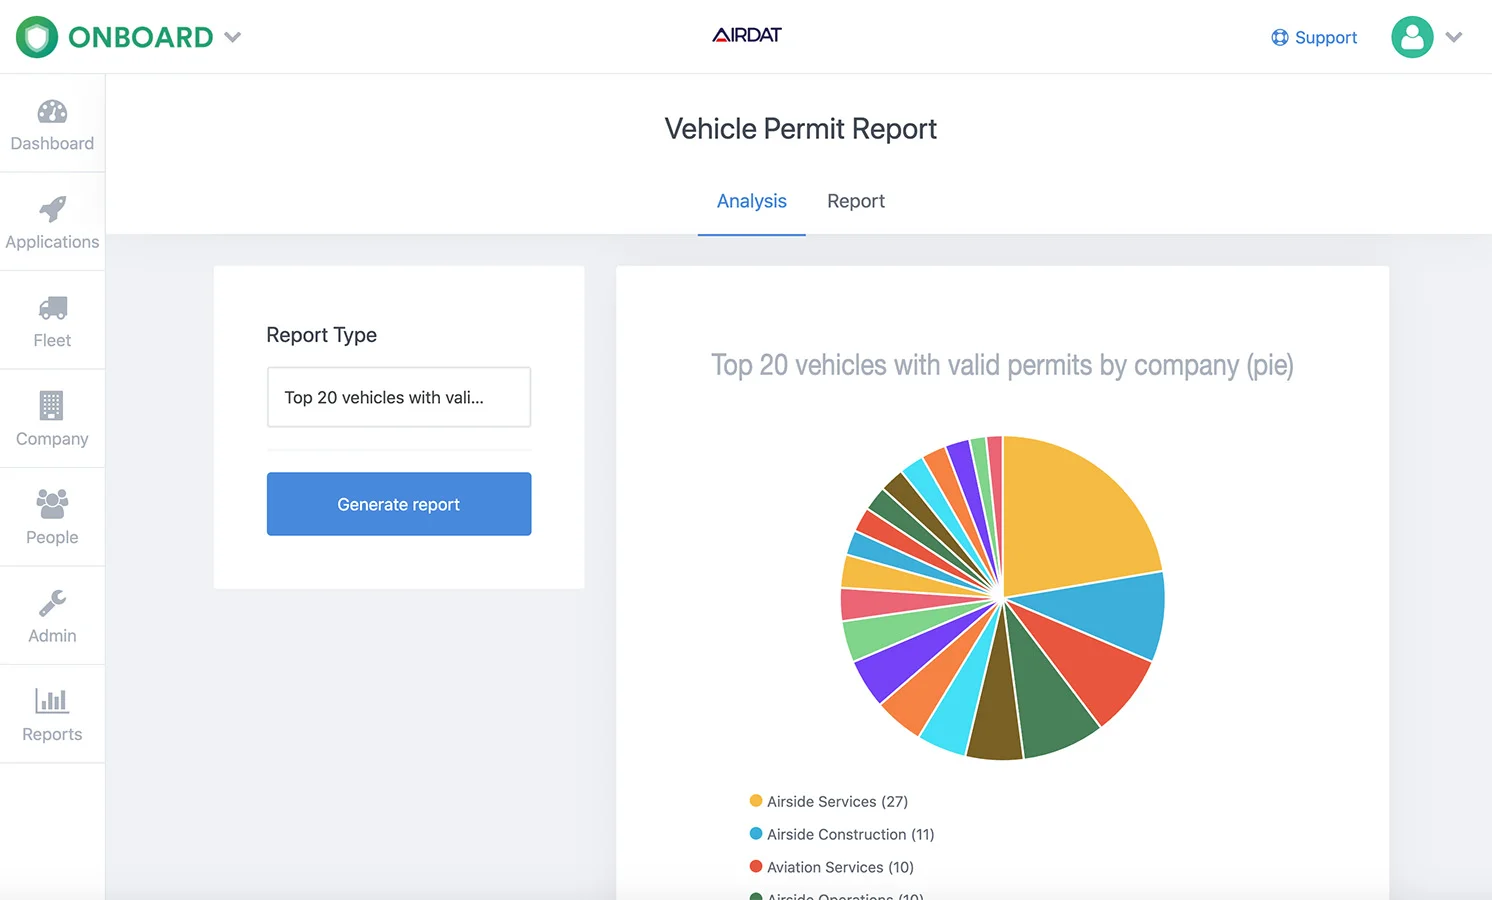 Vehicle permit report | AIRDAT Onboard